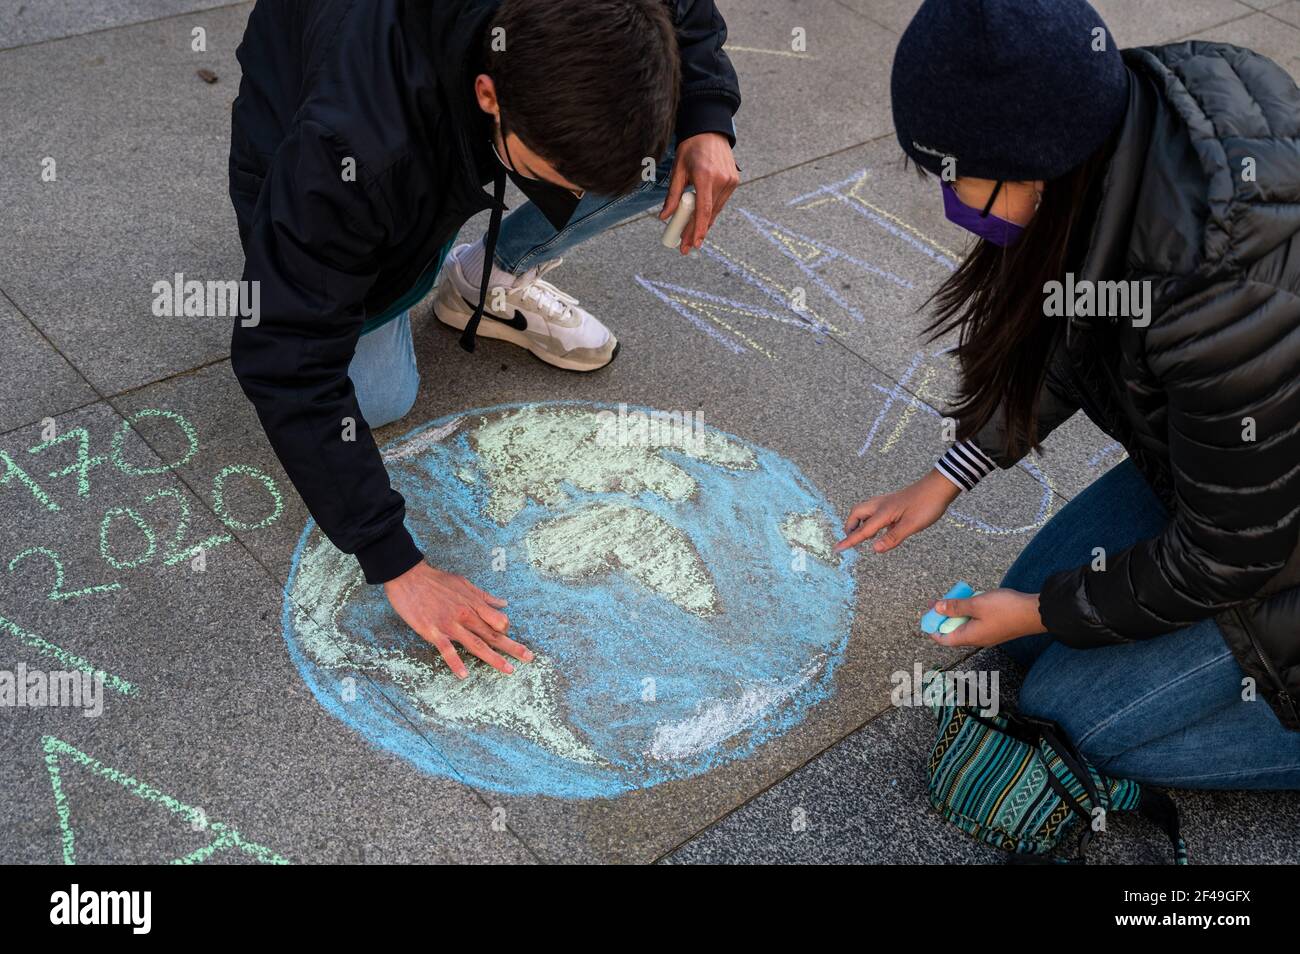 Madrid, Spain. 19th Mar, 2021. Climate change activists of 'Fridays for Future' group painting the Earth with chalks during a protest in front of the Spanish Parliament calling for action in climate policies since it has been 5 years from the Paris Agreement on Climate Change and global temperature of the planet keeps rising. Credit: Marcos del Mazo/Alamy Live News Stock Photo